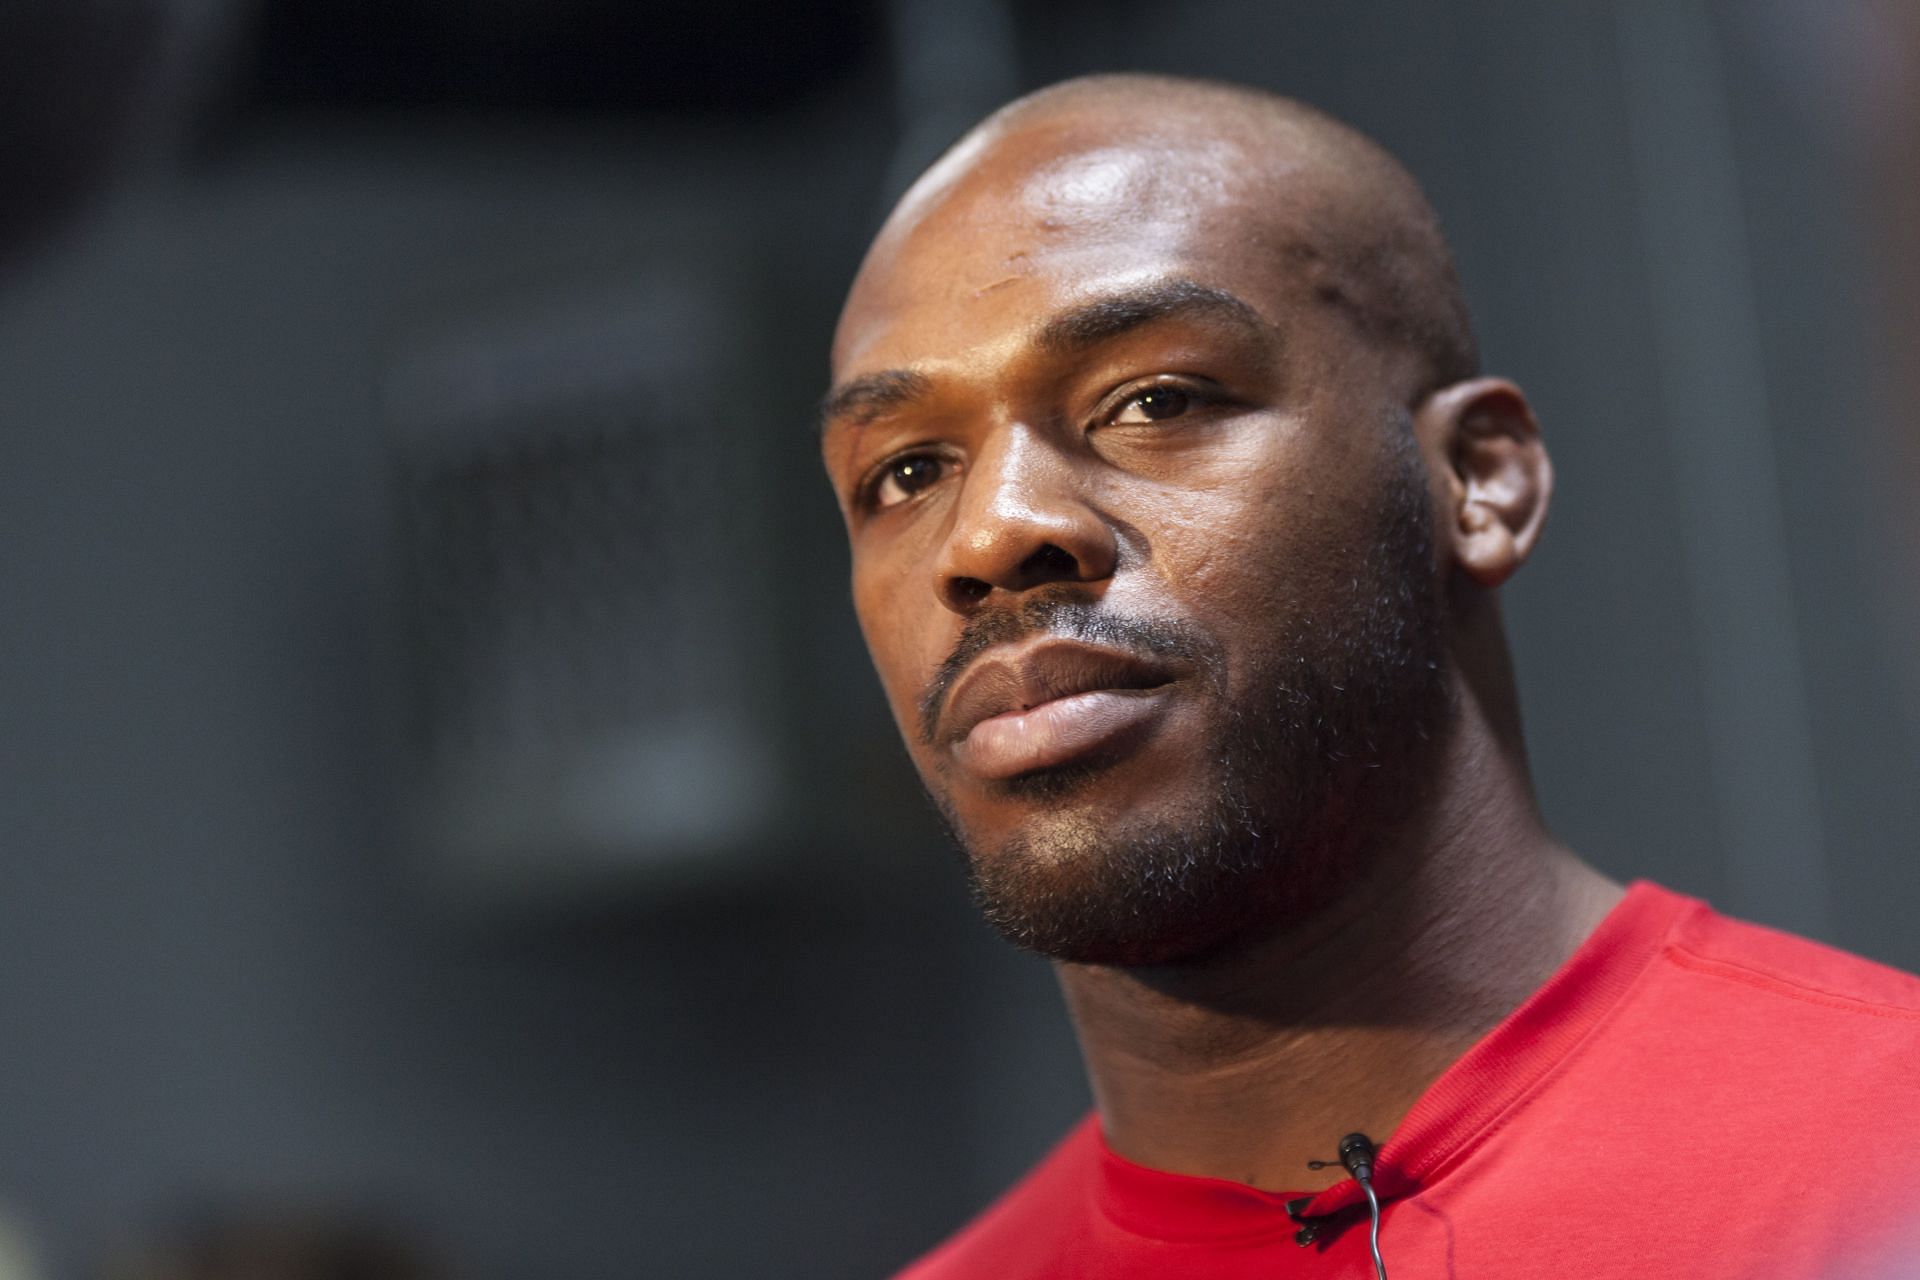 Jon Jones should aim to retire with his legacy intact - just like Georges St-Pierre